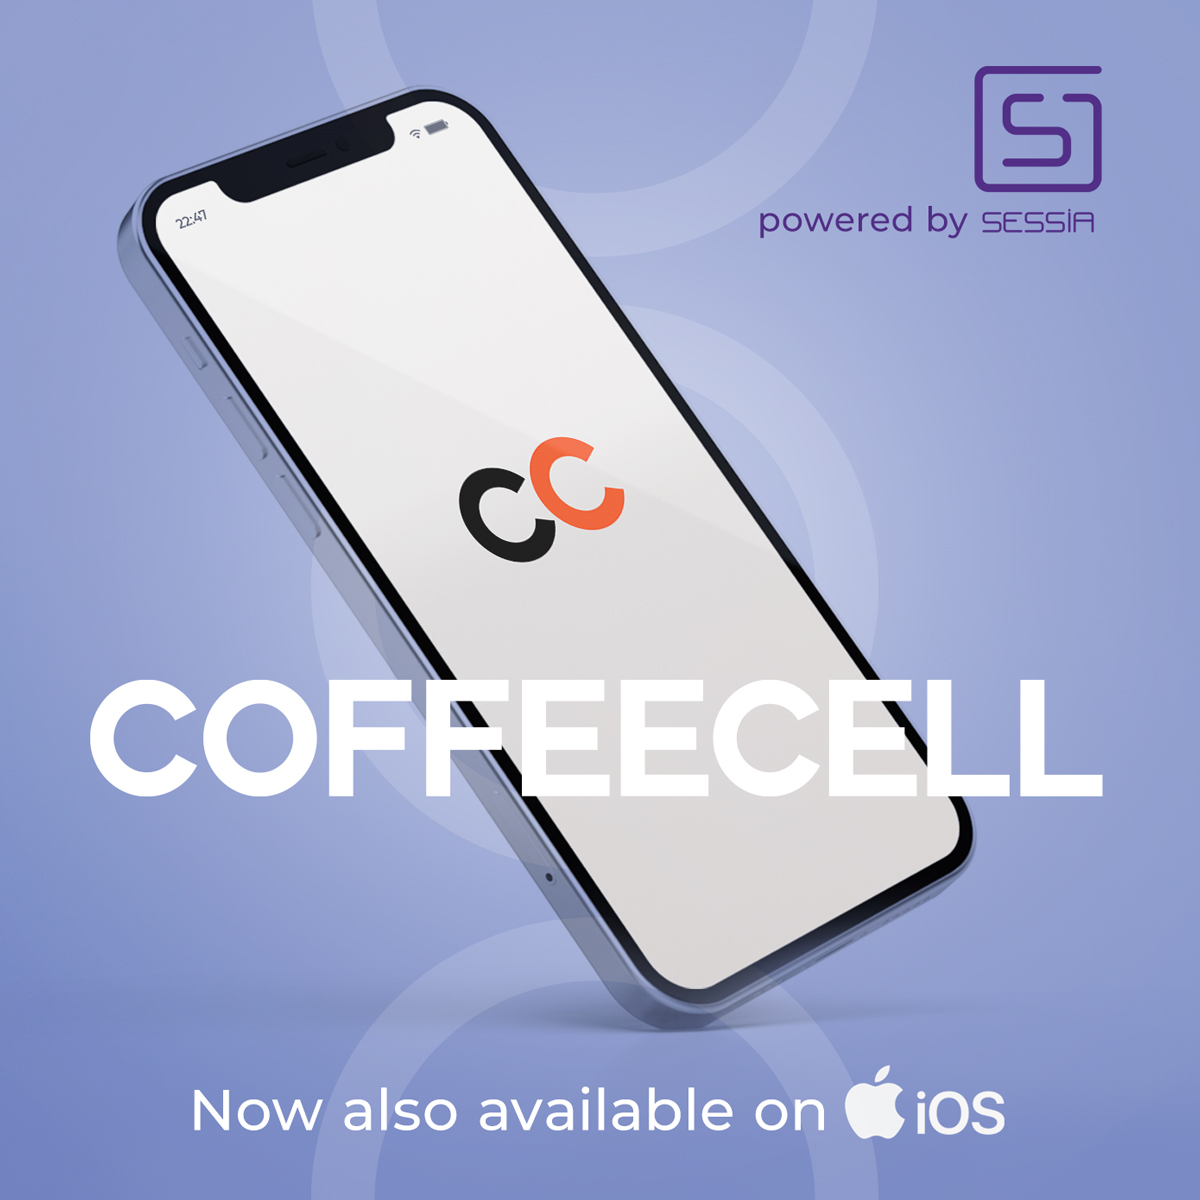 COFFEECELL  also available on iOS.